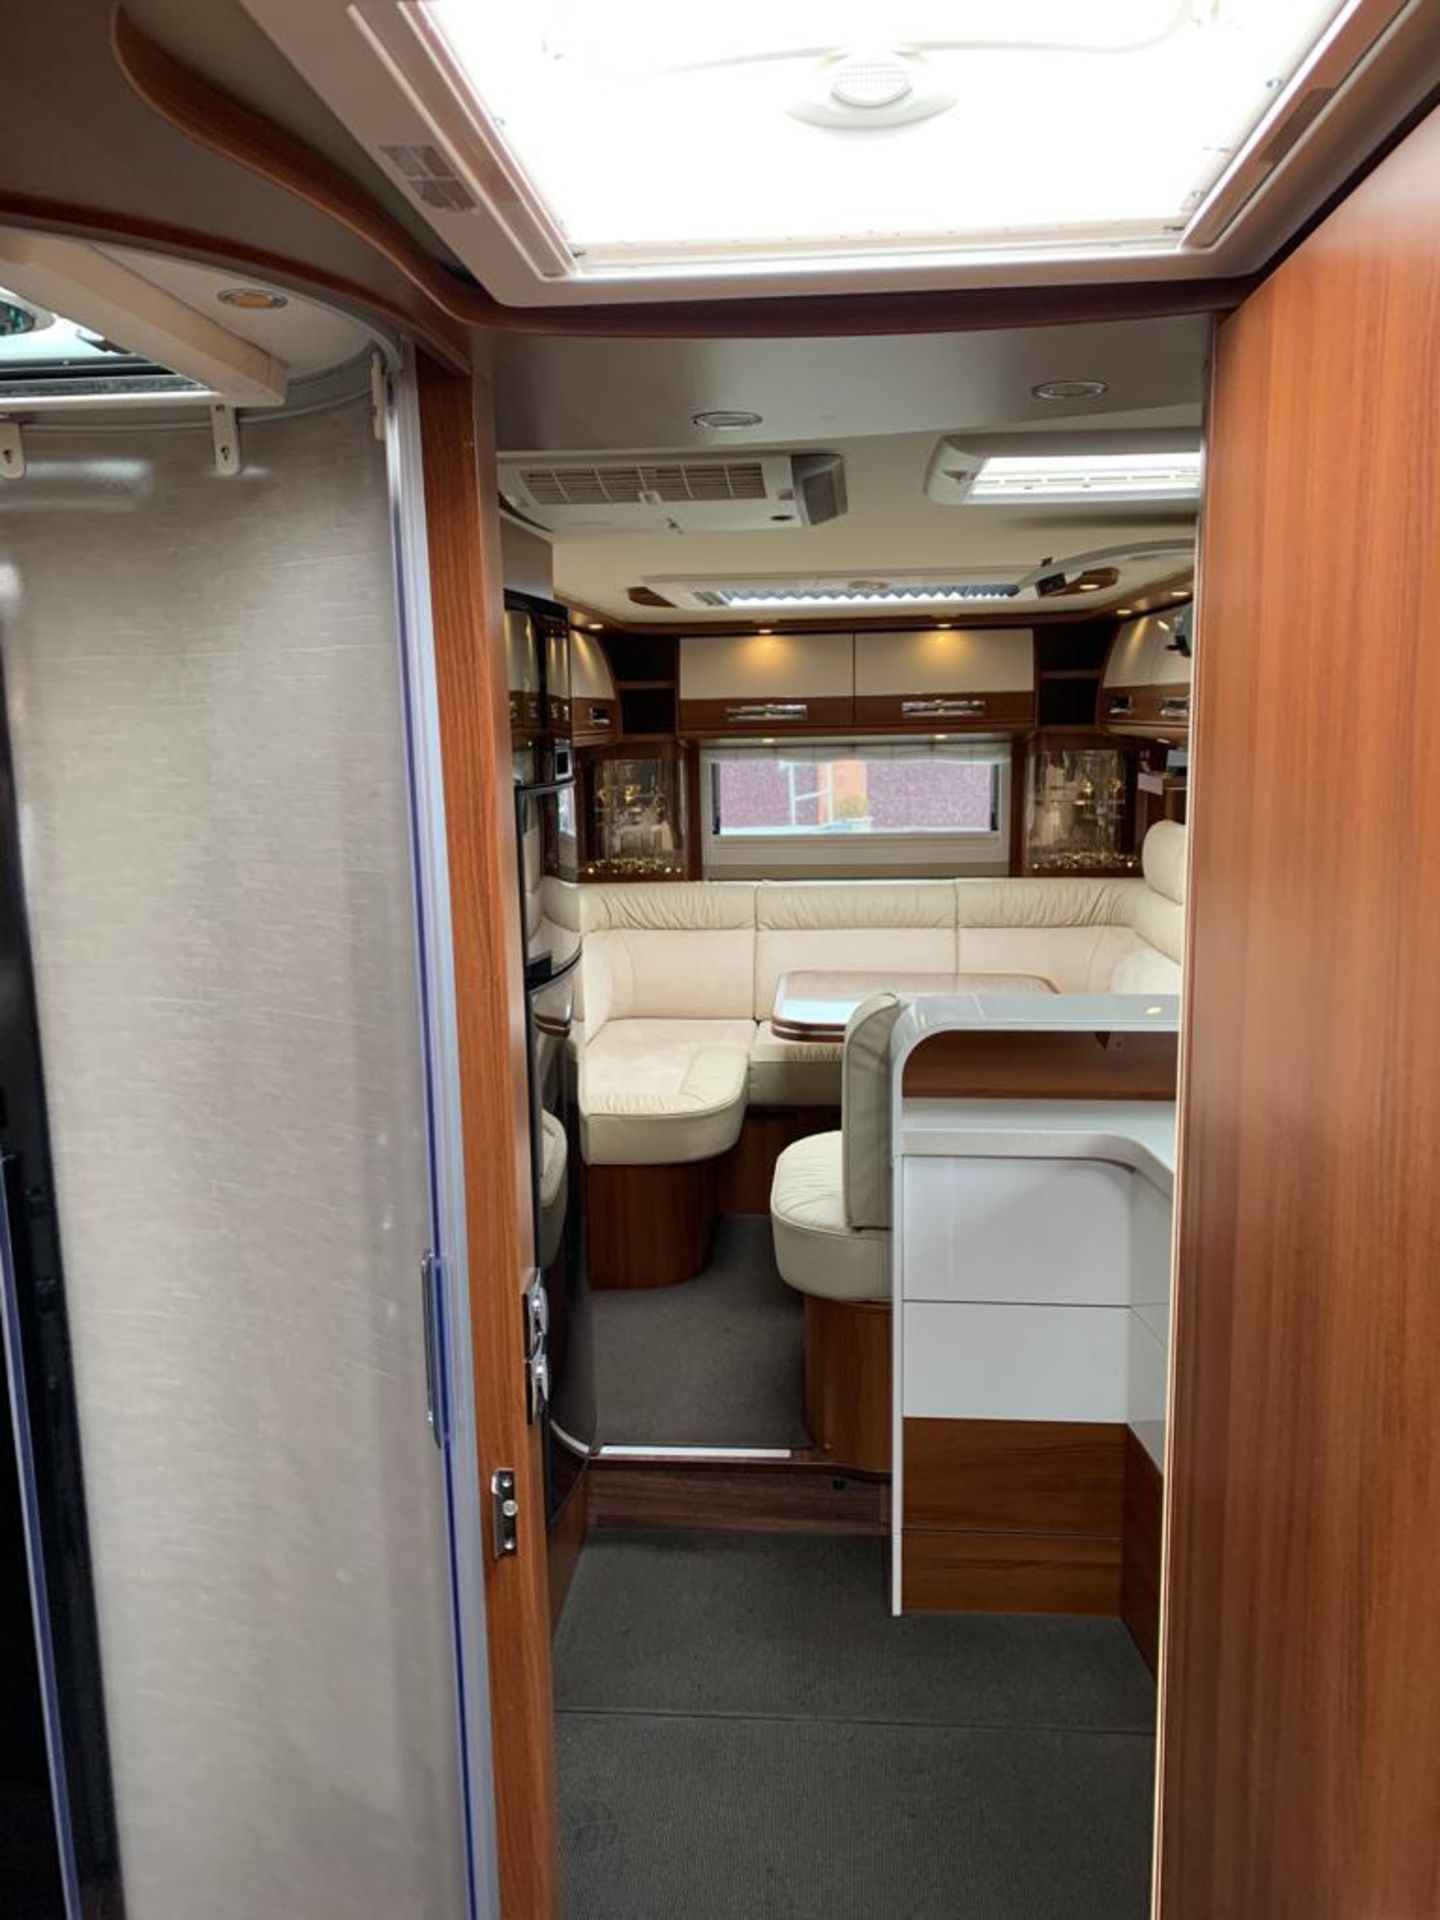 2020 CARTHAGO LINER-FOR-TWO 53L MOTORHOME 11 mths WARRANTY 4529 MILES, MINT CONDITION NO VAT - Image 26 of 38